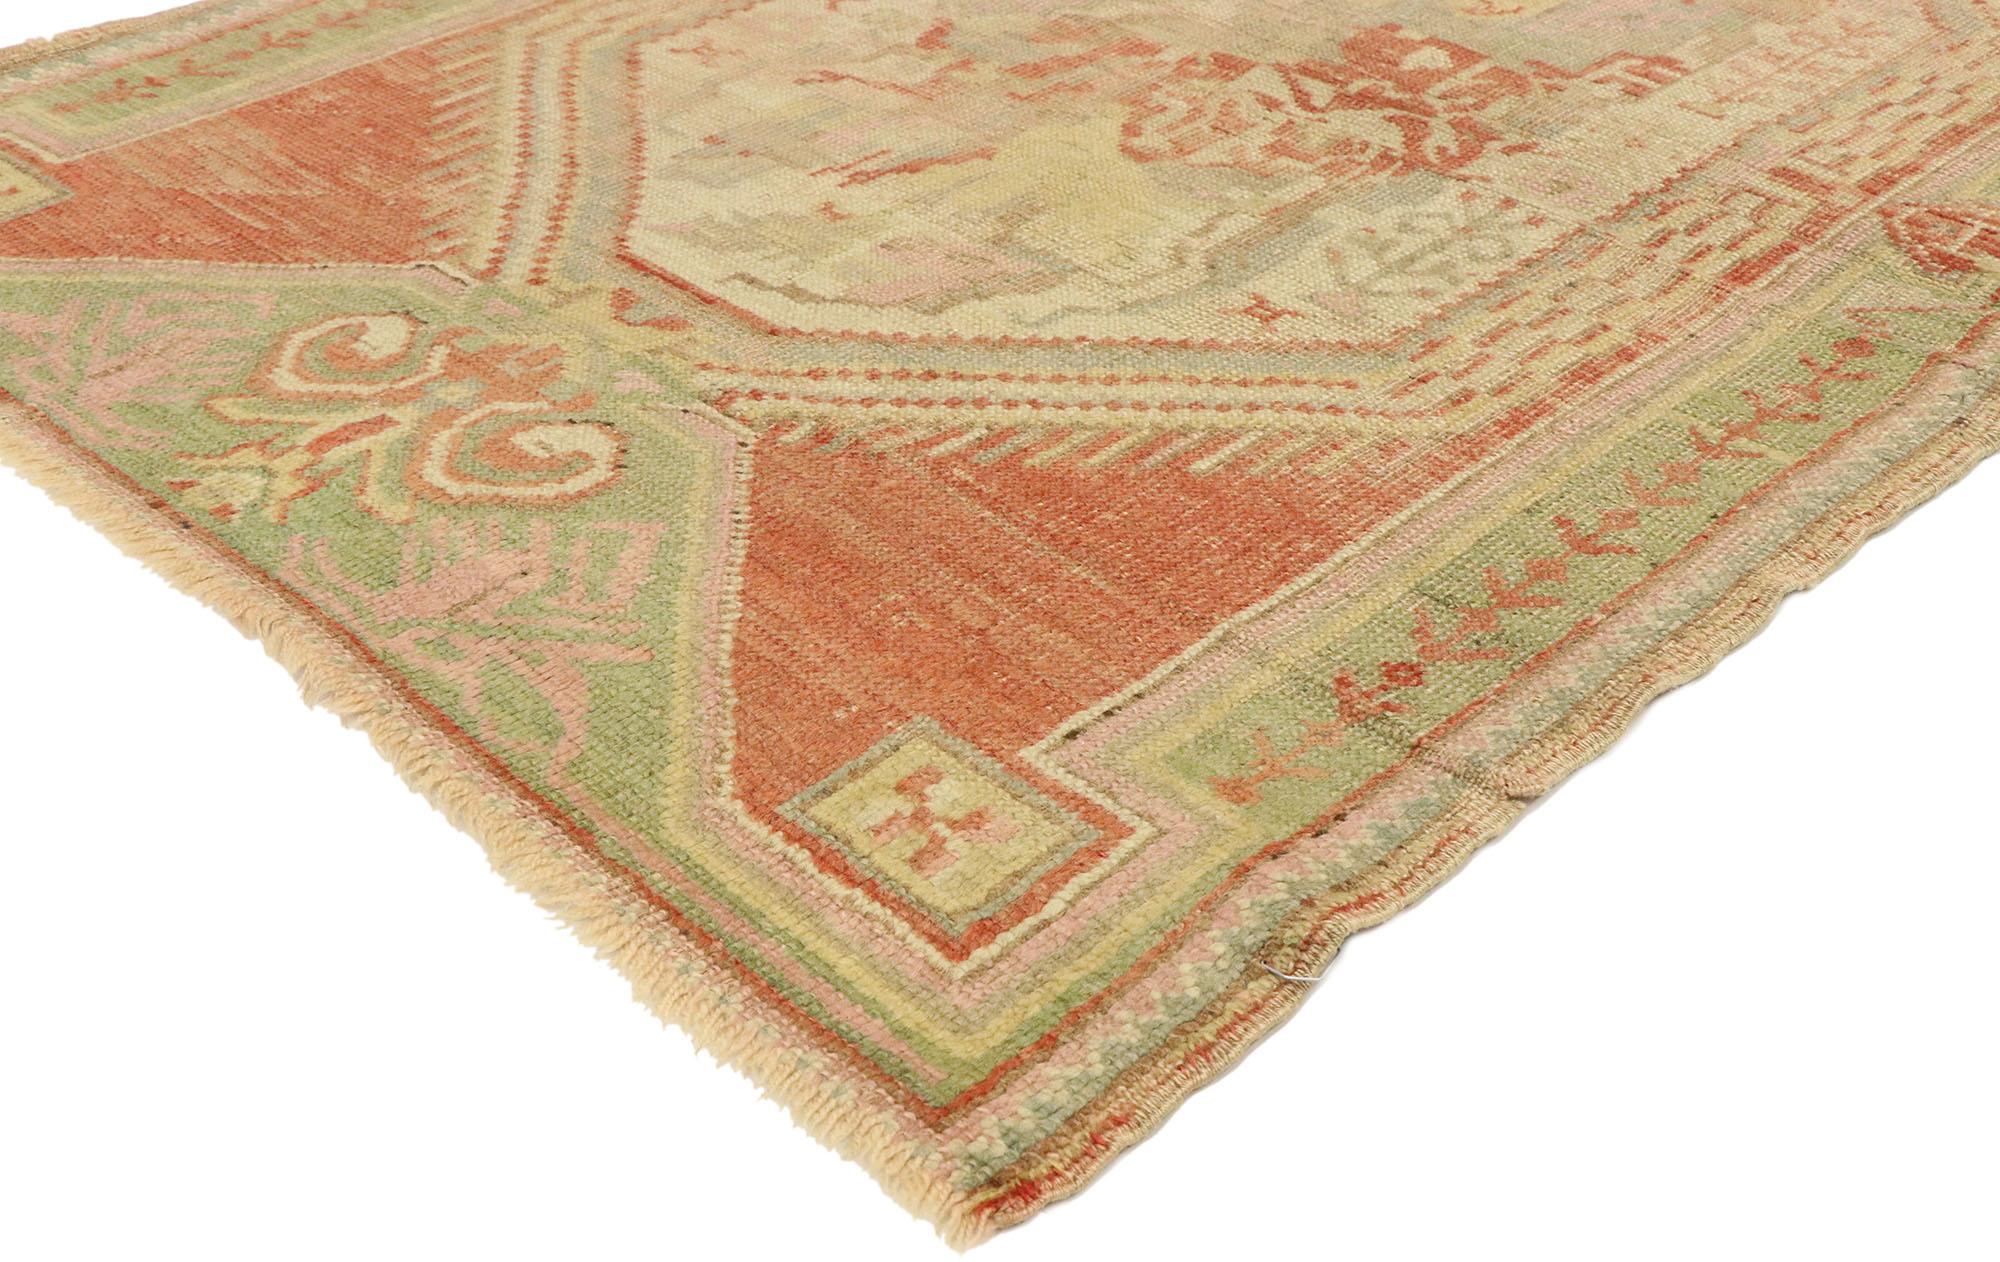 70925 Vintage Turkish Oushak Rug, 03'09 X 05'06. In this hand-knotted wool vintage Turkish Oushak rug, the fusion of captivating French Provincial and romantic boho chic creates an enchanting tale of style. Intricately crafted floral motifs evoke